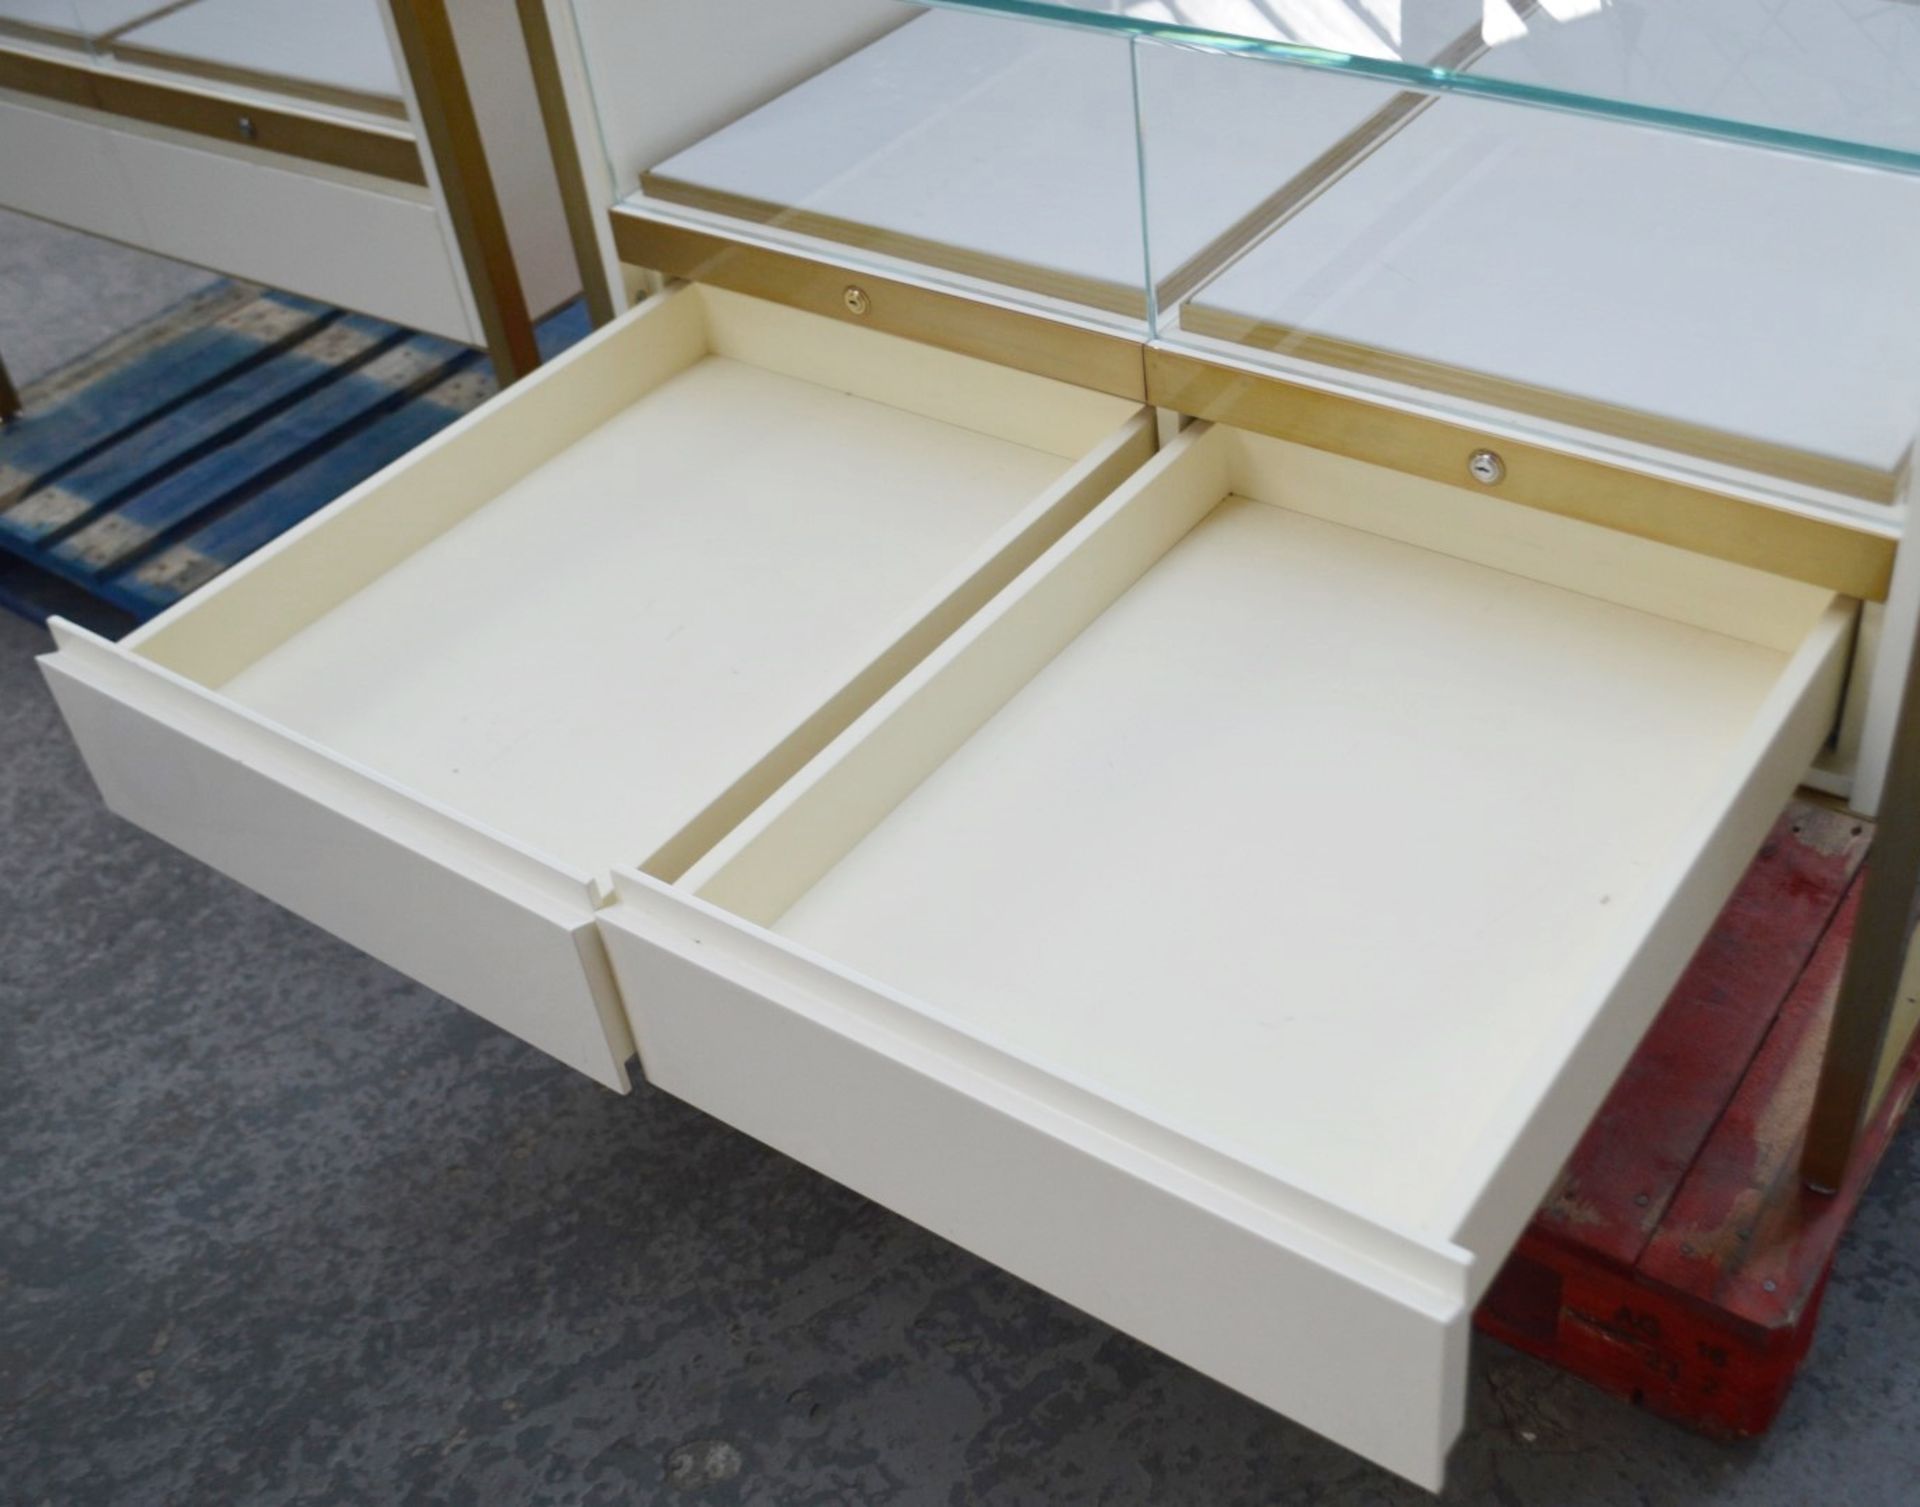 1 x Freestanding Jewellery Display Cabinet Featuring 2 x Pull-Out Trays With Leather Inserts - Image 3 of 7